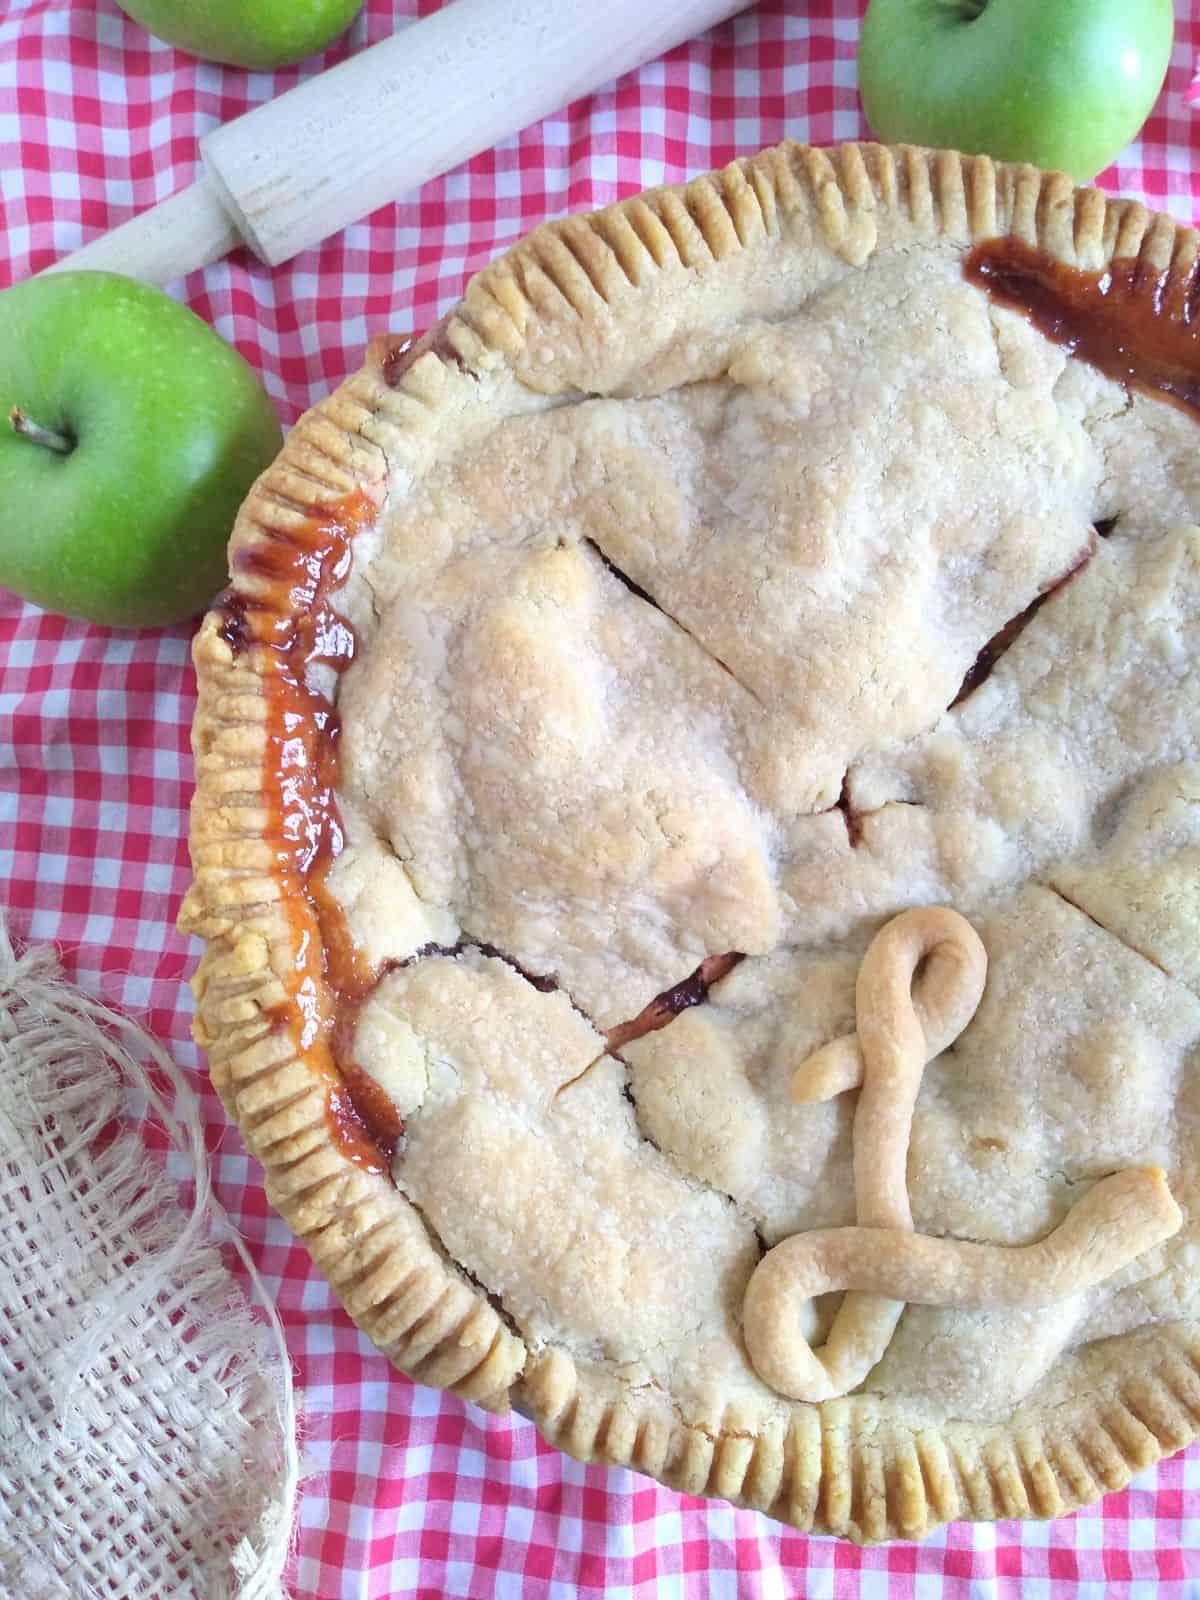 An apple pie with a double crust sitting on a red and white checkered towel. Green apples are next to the pie.